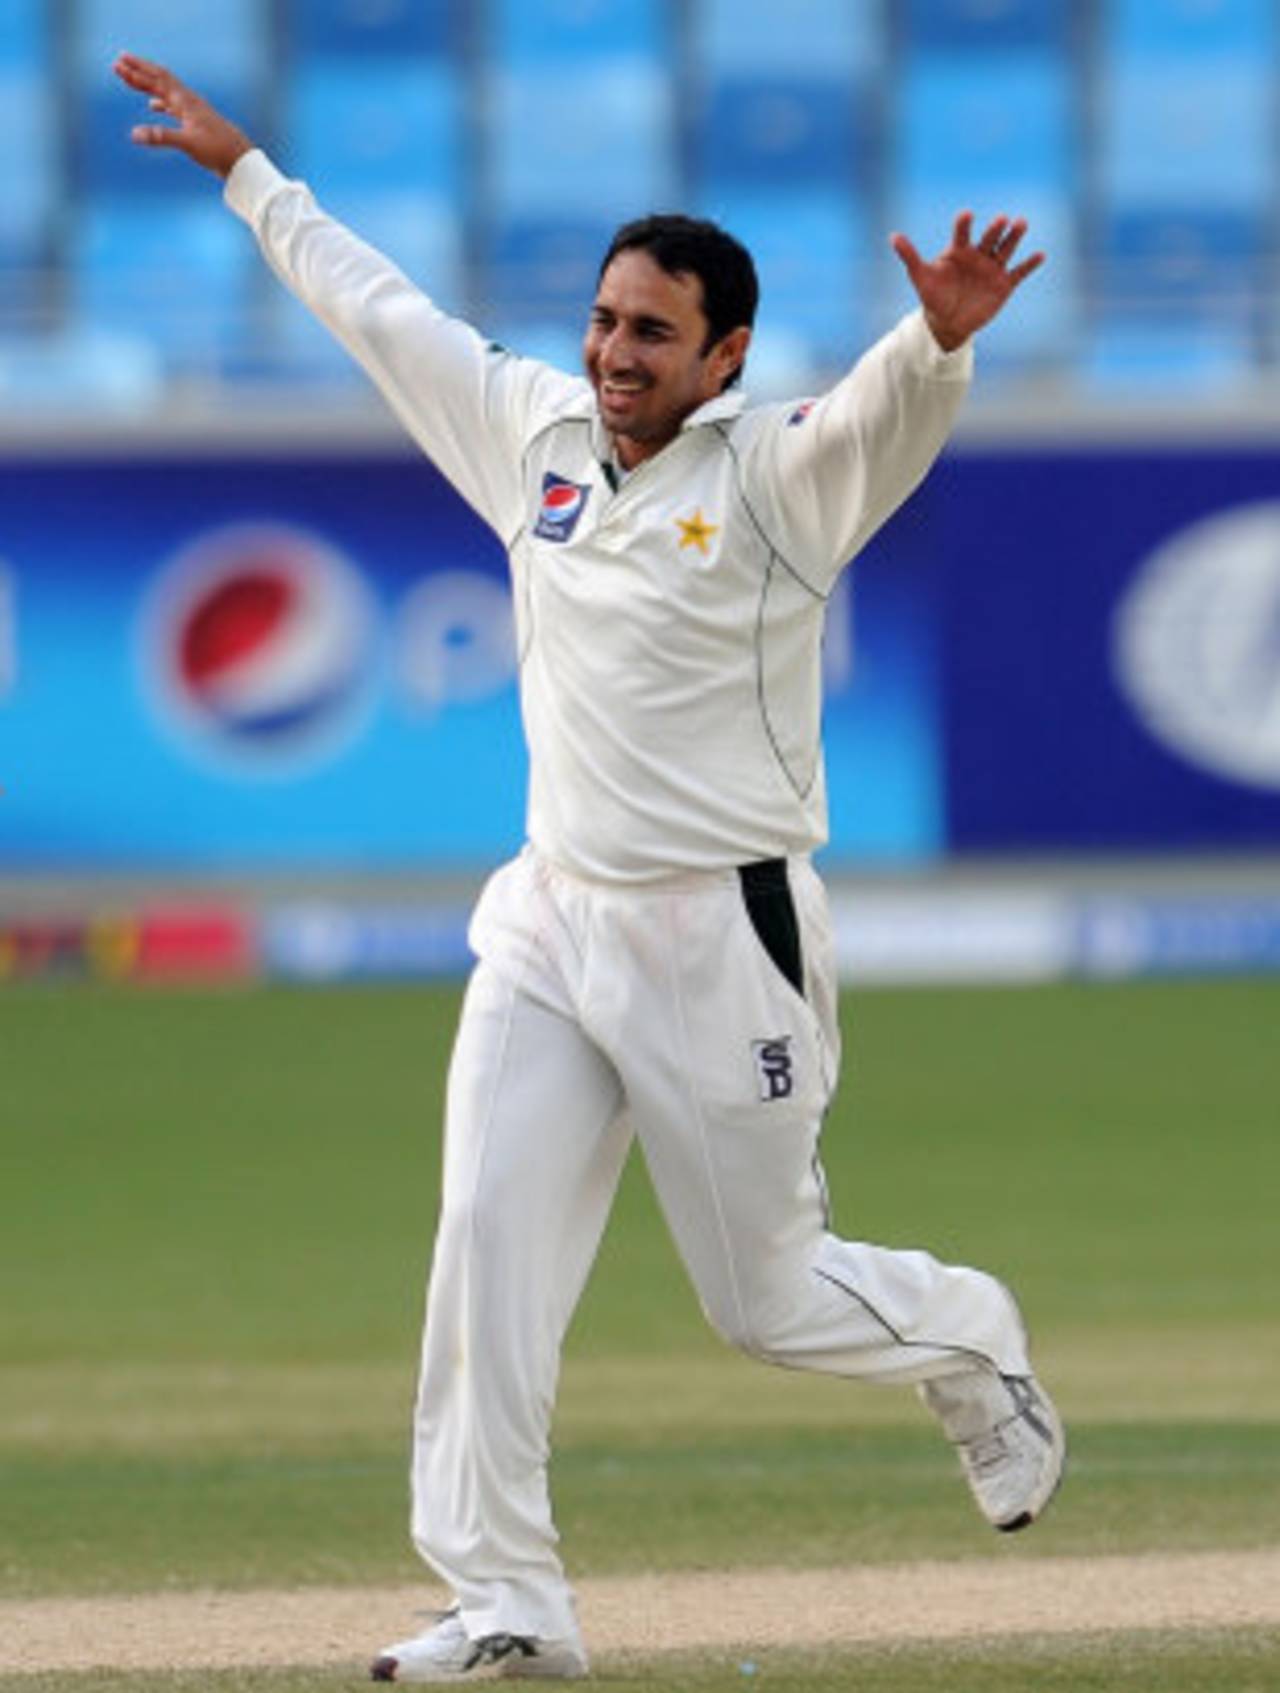 Saeed Ajmal is pleased after his five-for, Pakistan v Sri Lanka, 2nd Test, Dubai, 4th day, October 29, 2011